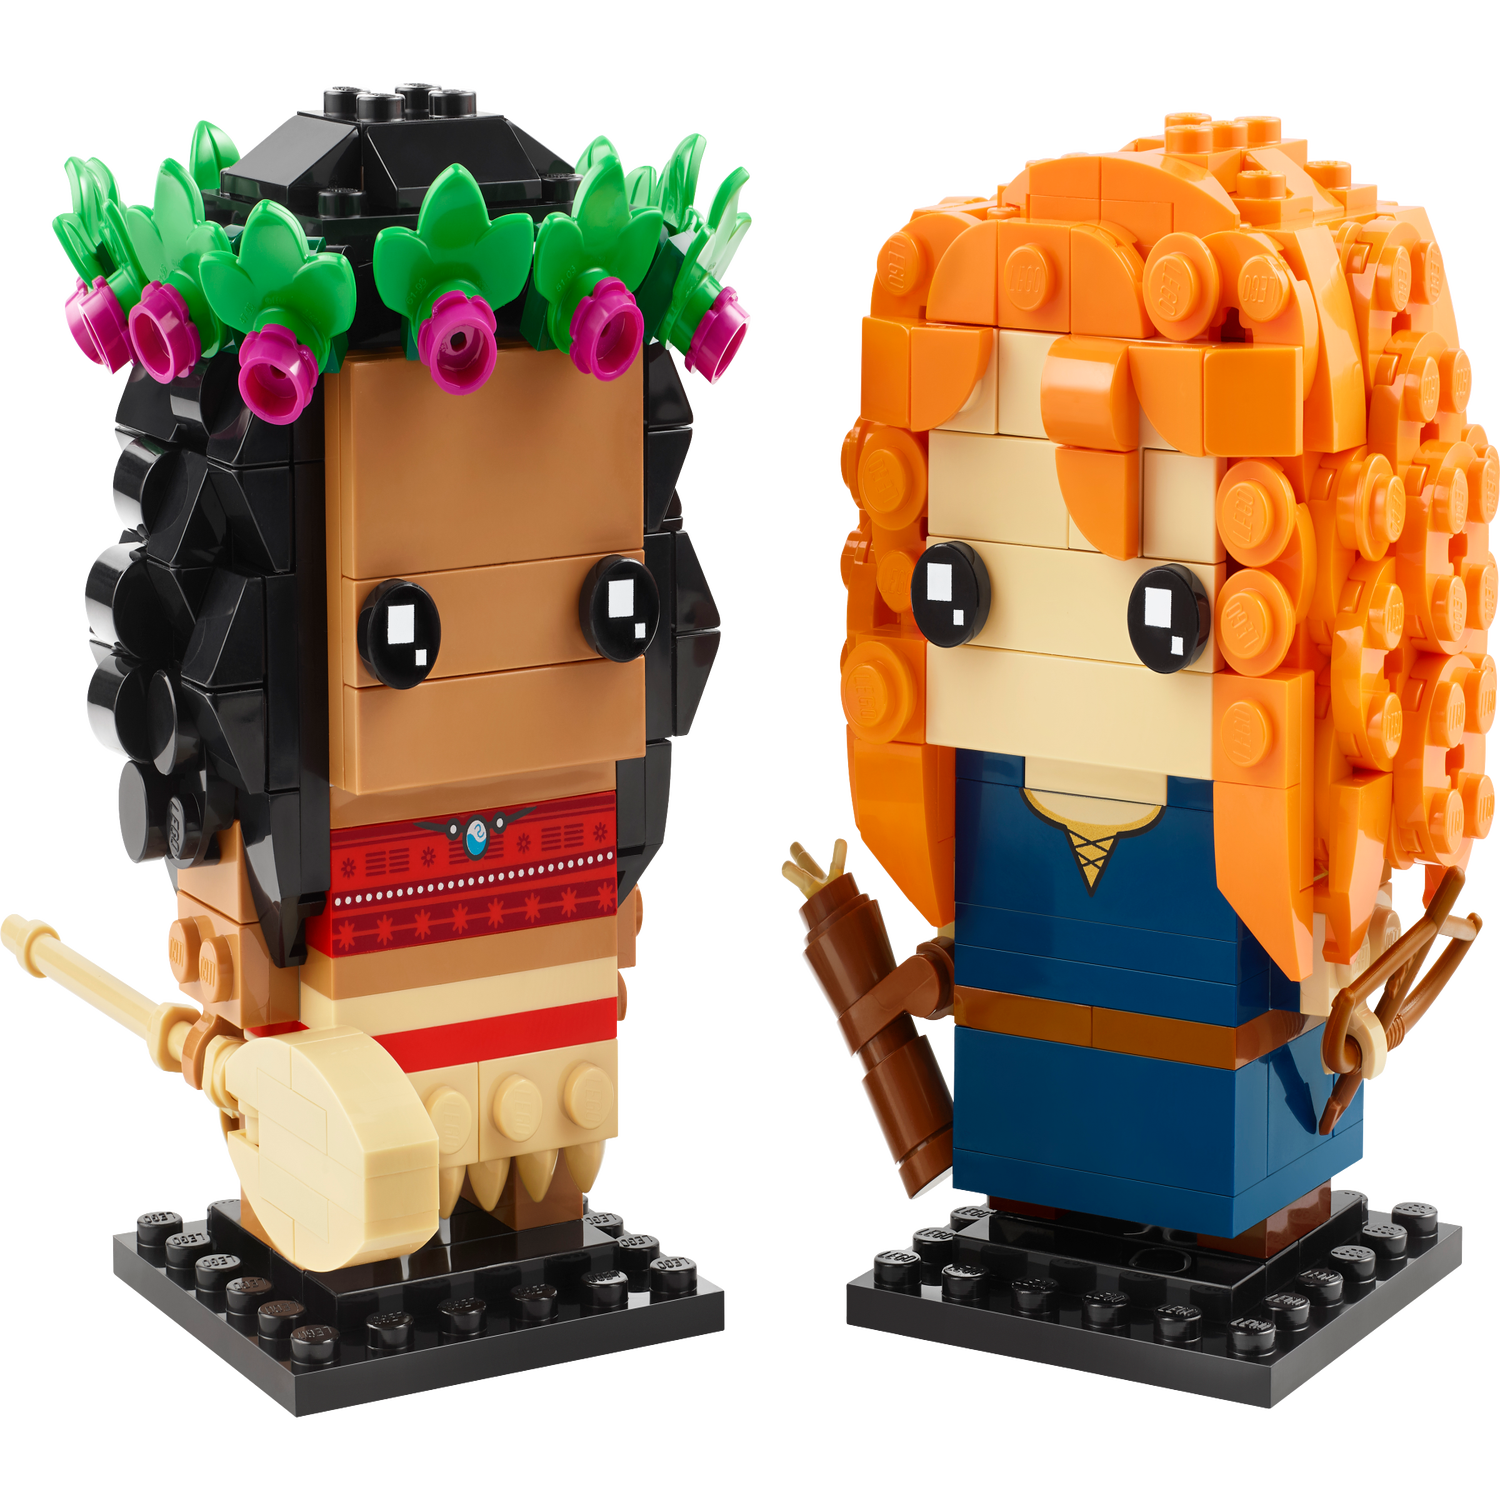 & 40621 | | Buy online at the Official LEGO® Shop